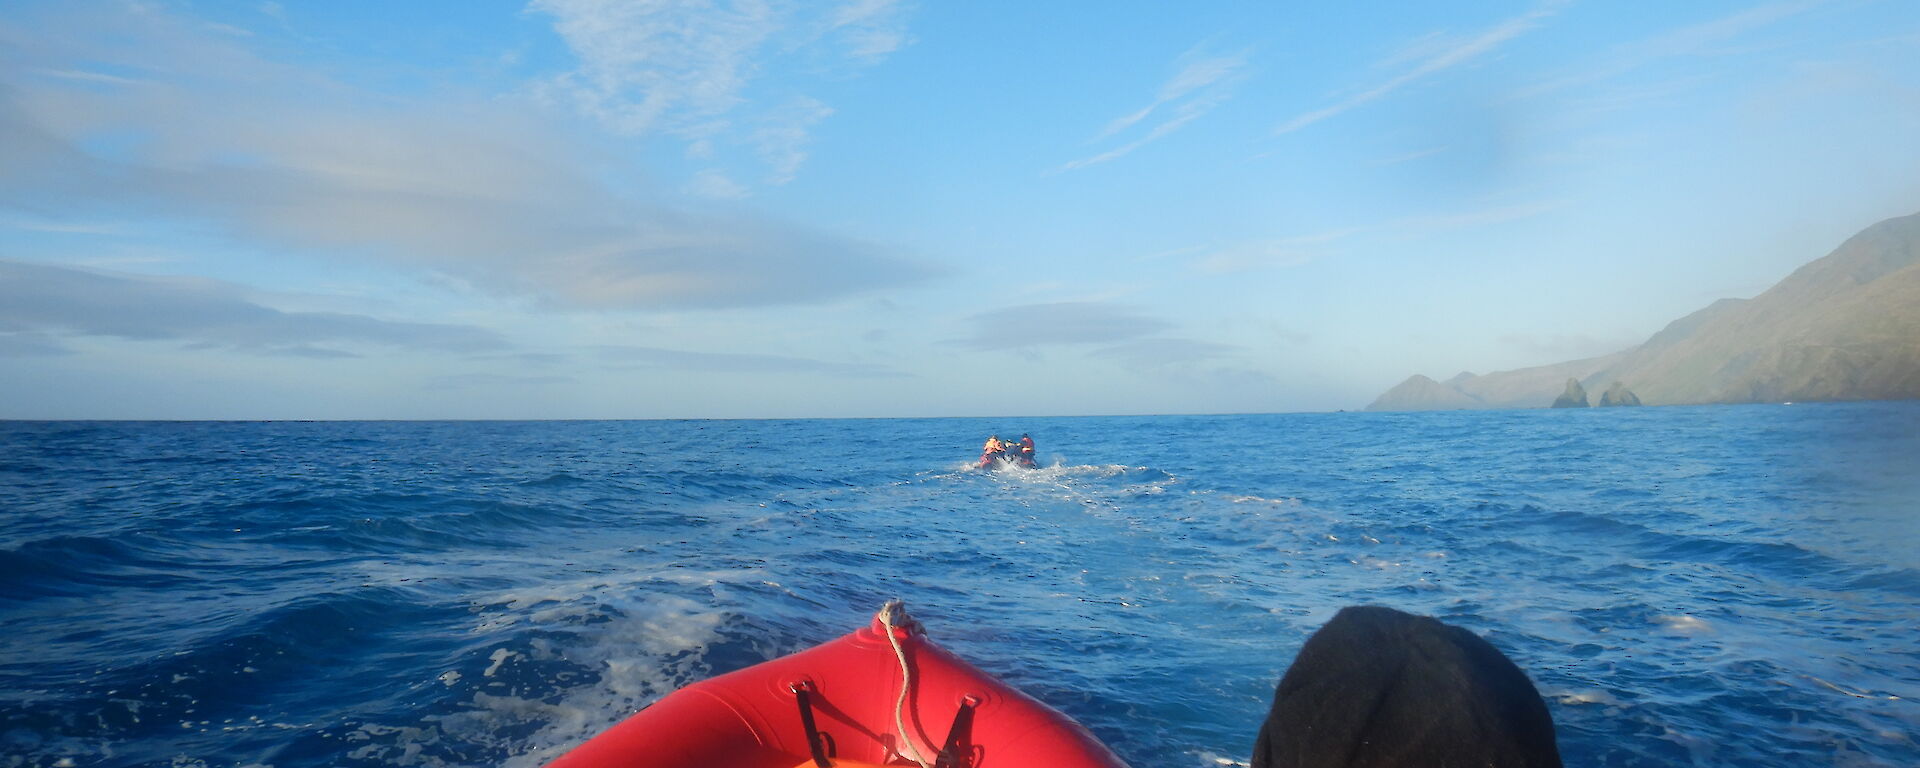 a view looking south to the Nuggets from one of the Macquarie Island IRBs (inflatable rubber boats with competent crew Greg’s head in the foreground